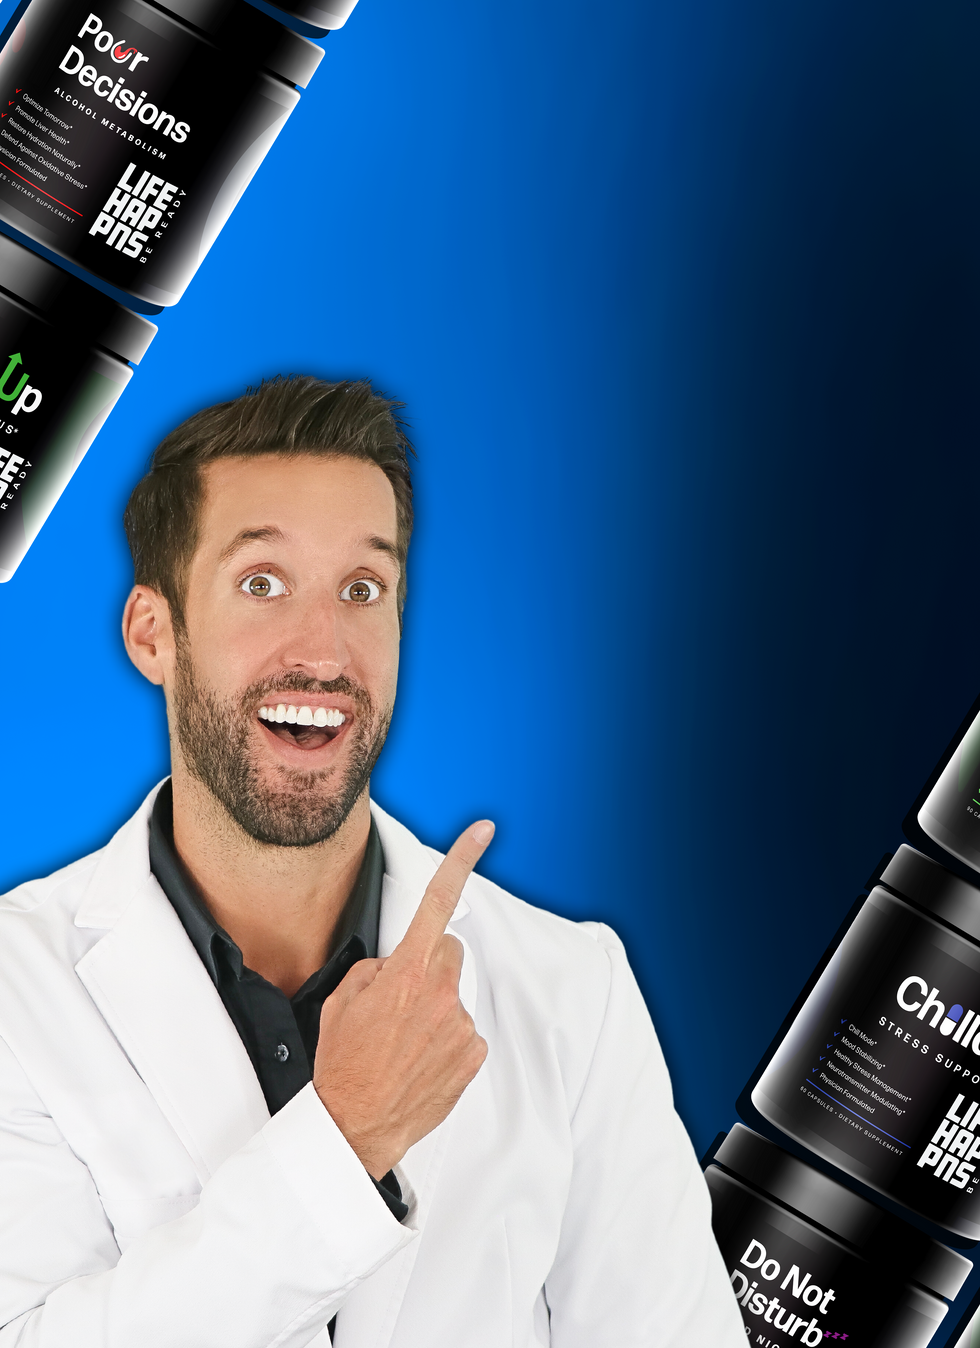 Blue Life Happns Banner with Dr. Jordan Wagner Doctor ER Pointing to Level Up, Do Not Disturb, Chillax, and Pour Decisions Supplements